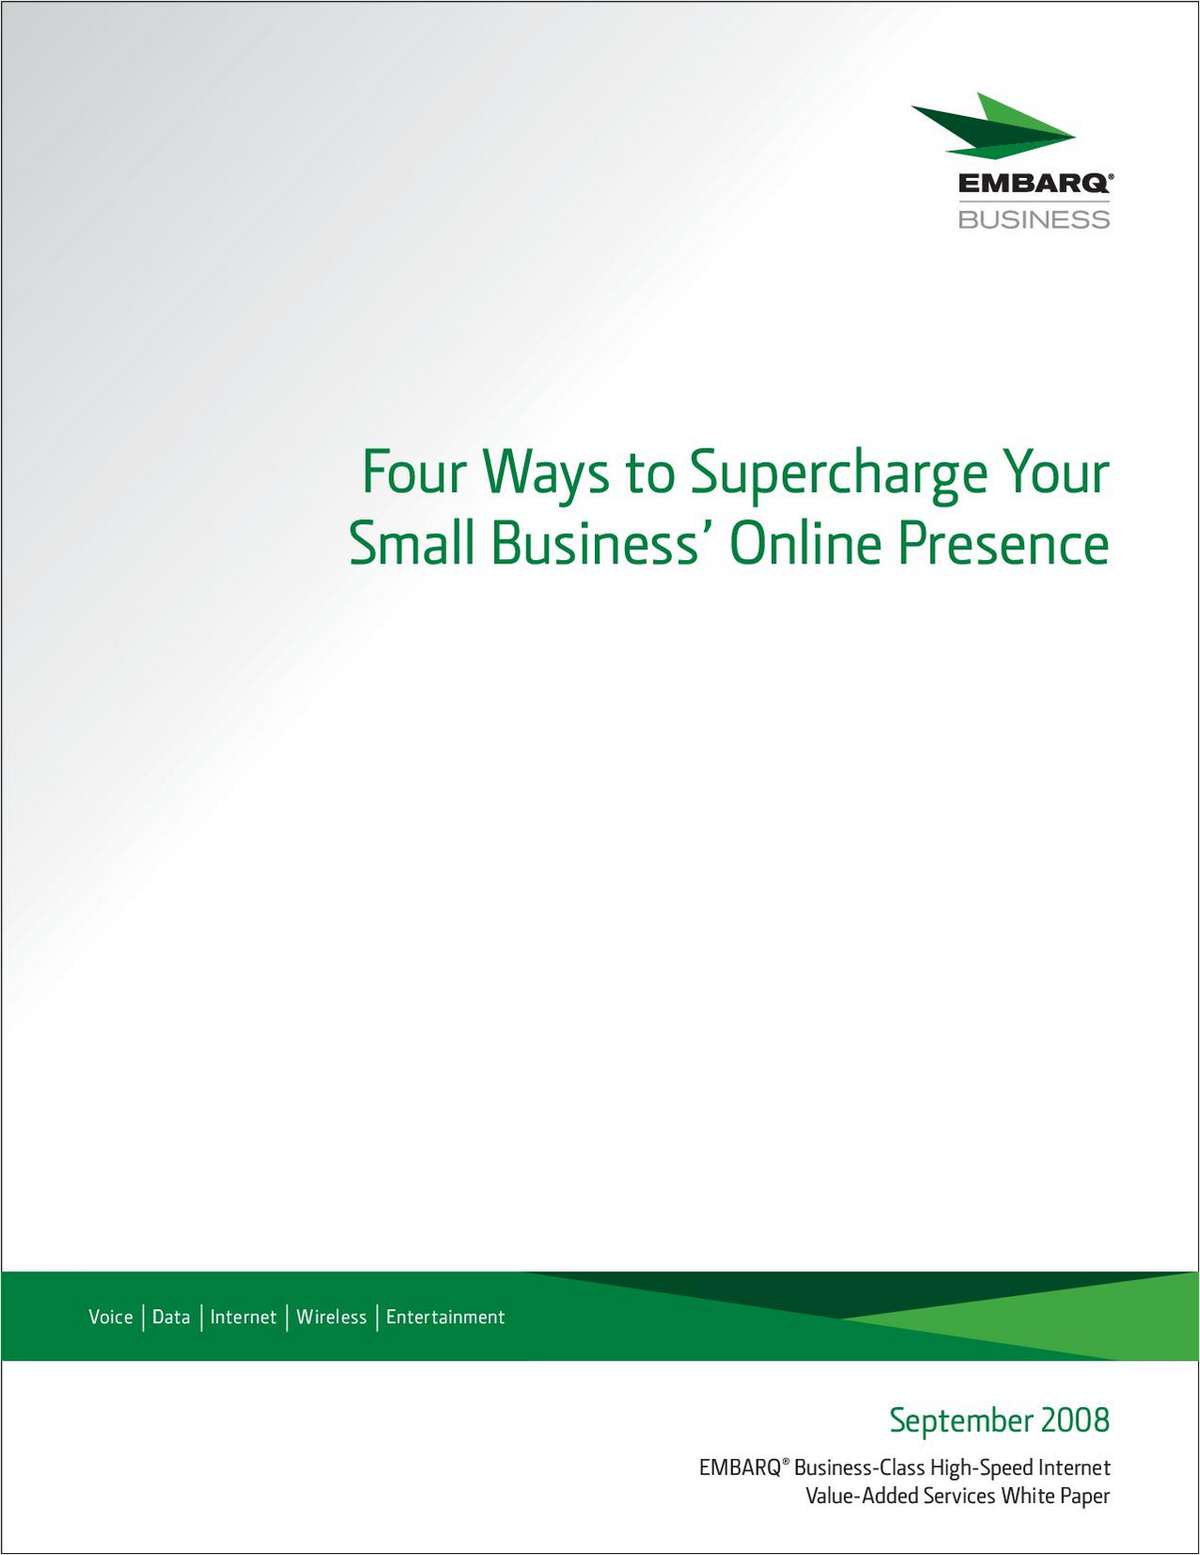 Four Ways to Supercharge Your Small Business' Online Presence